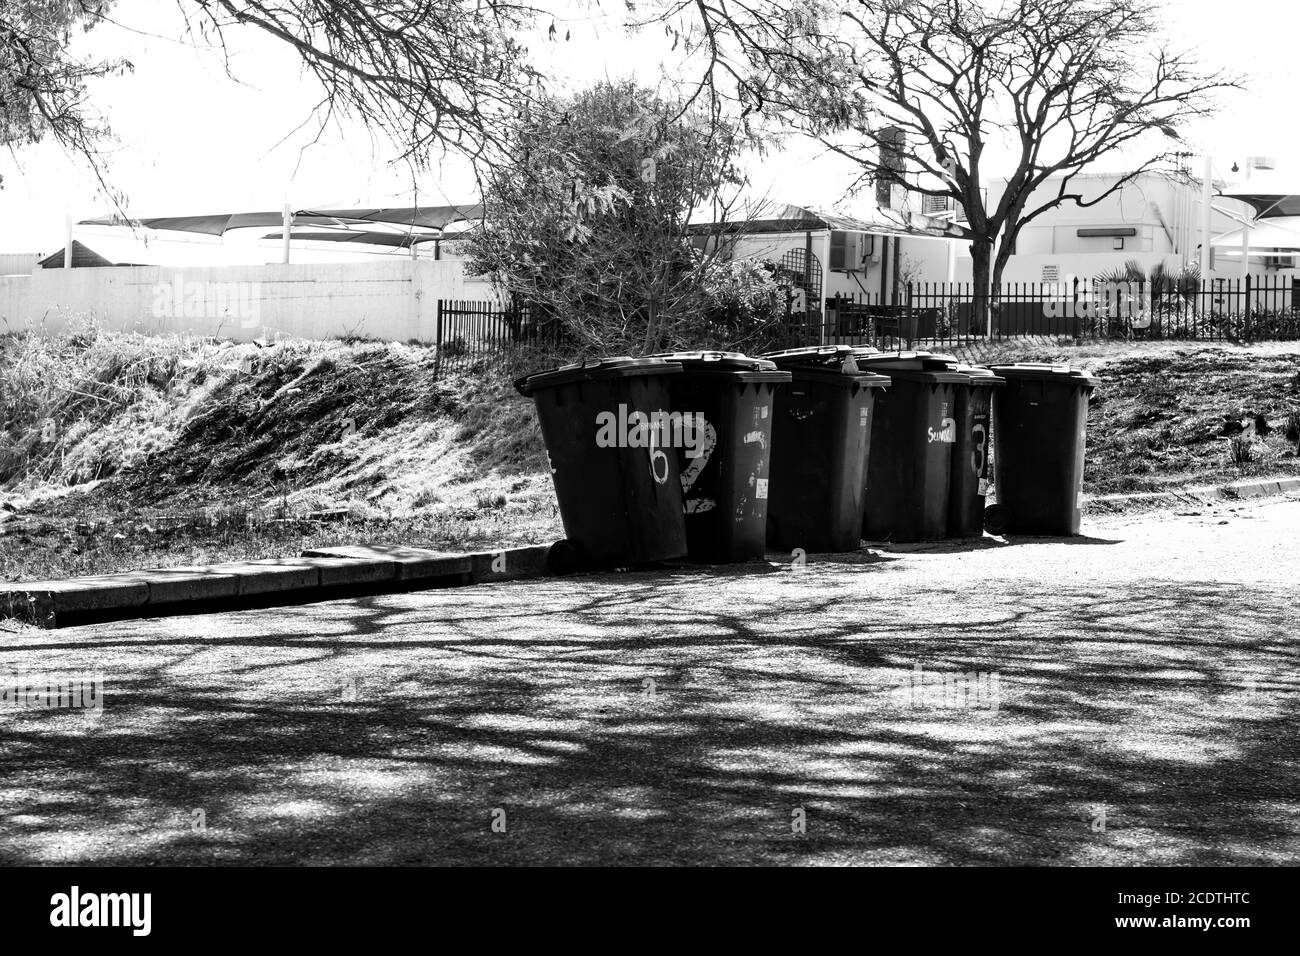 Six rubbish or gabage bins after ready for collection Stock Photo